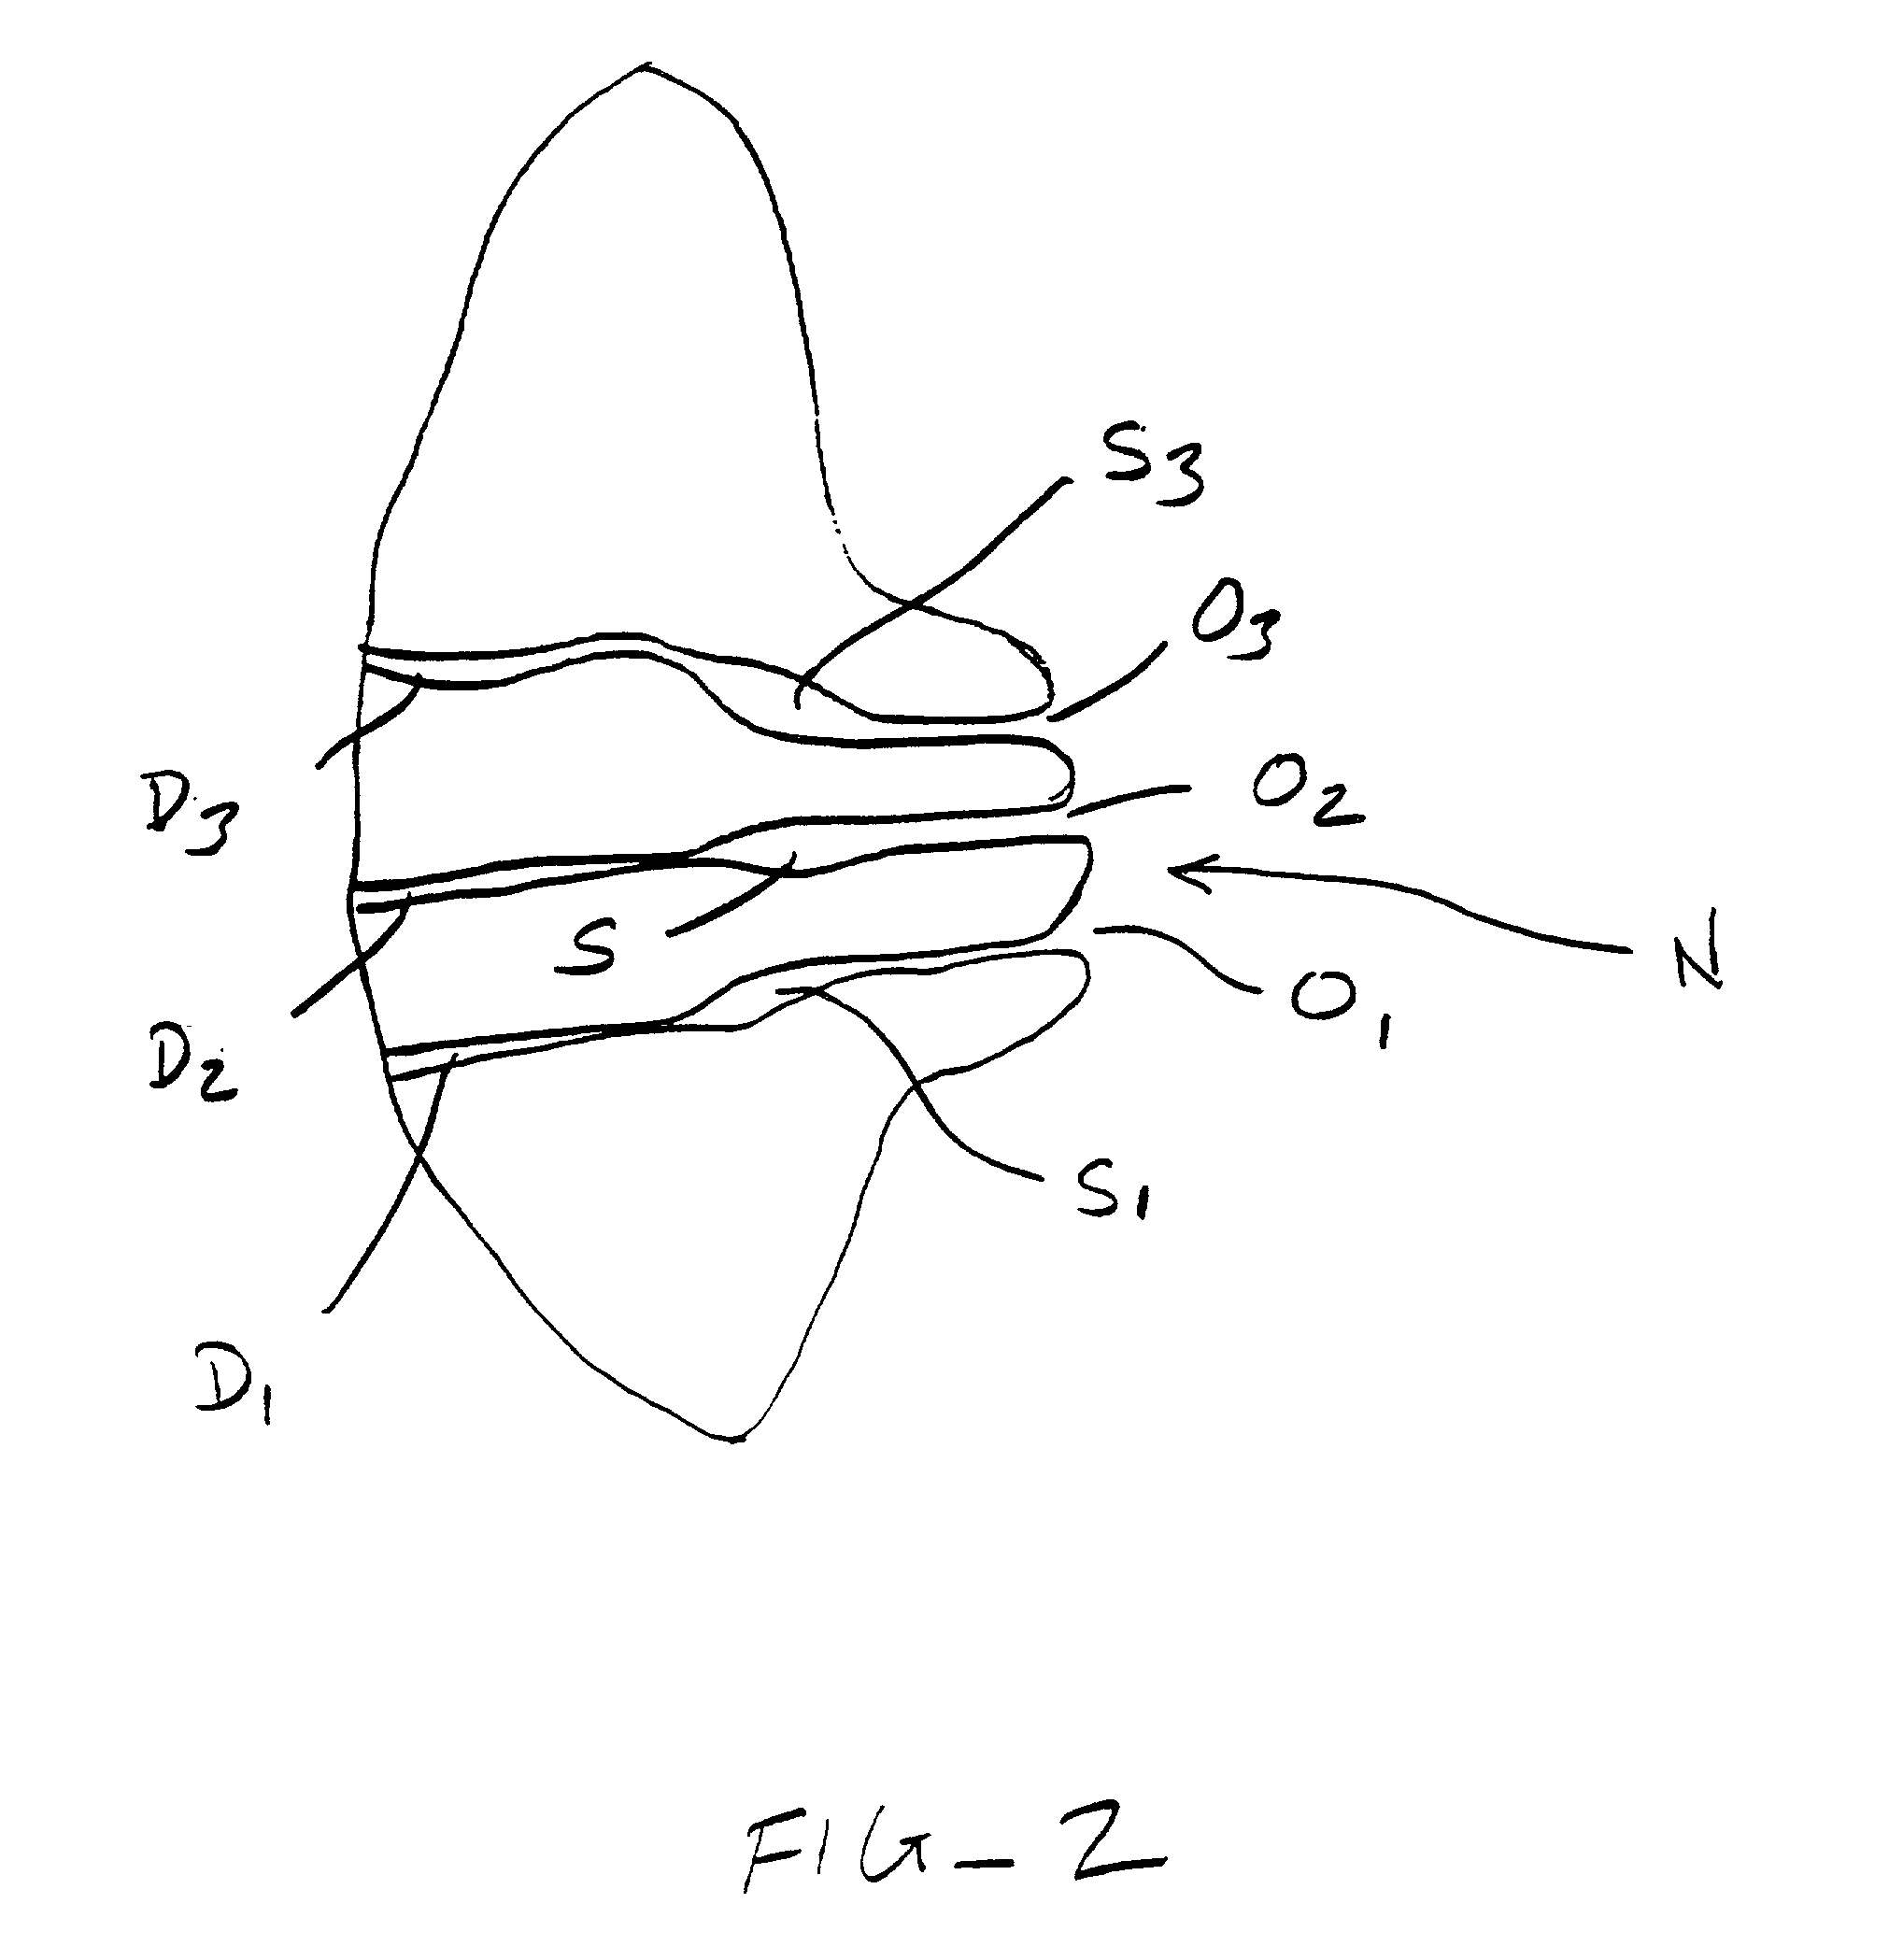 Methods and kits for indentifying ductal orifices in a nipple